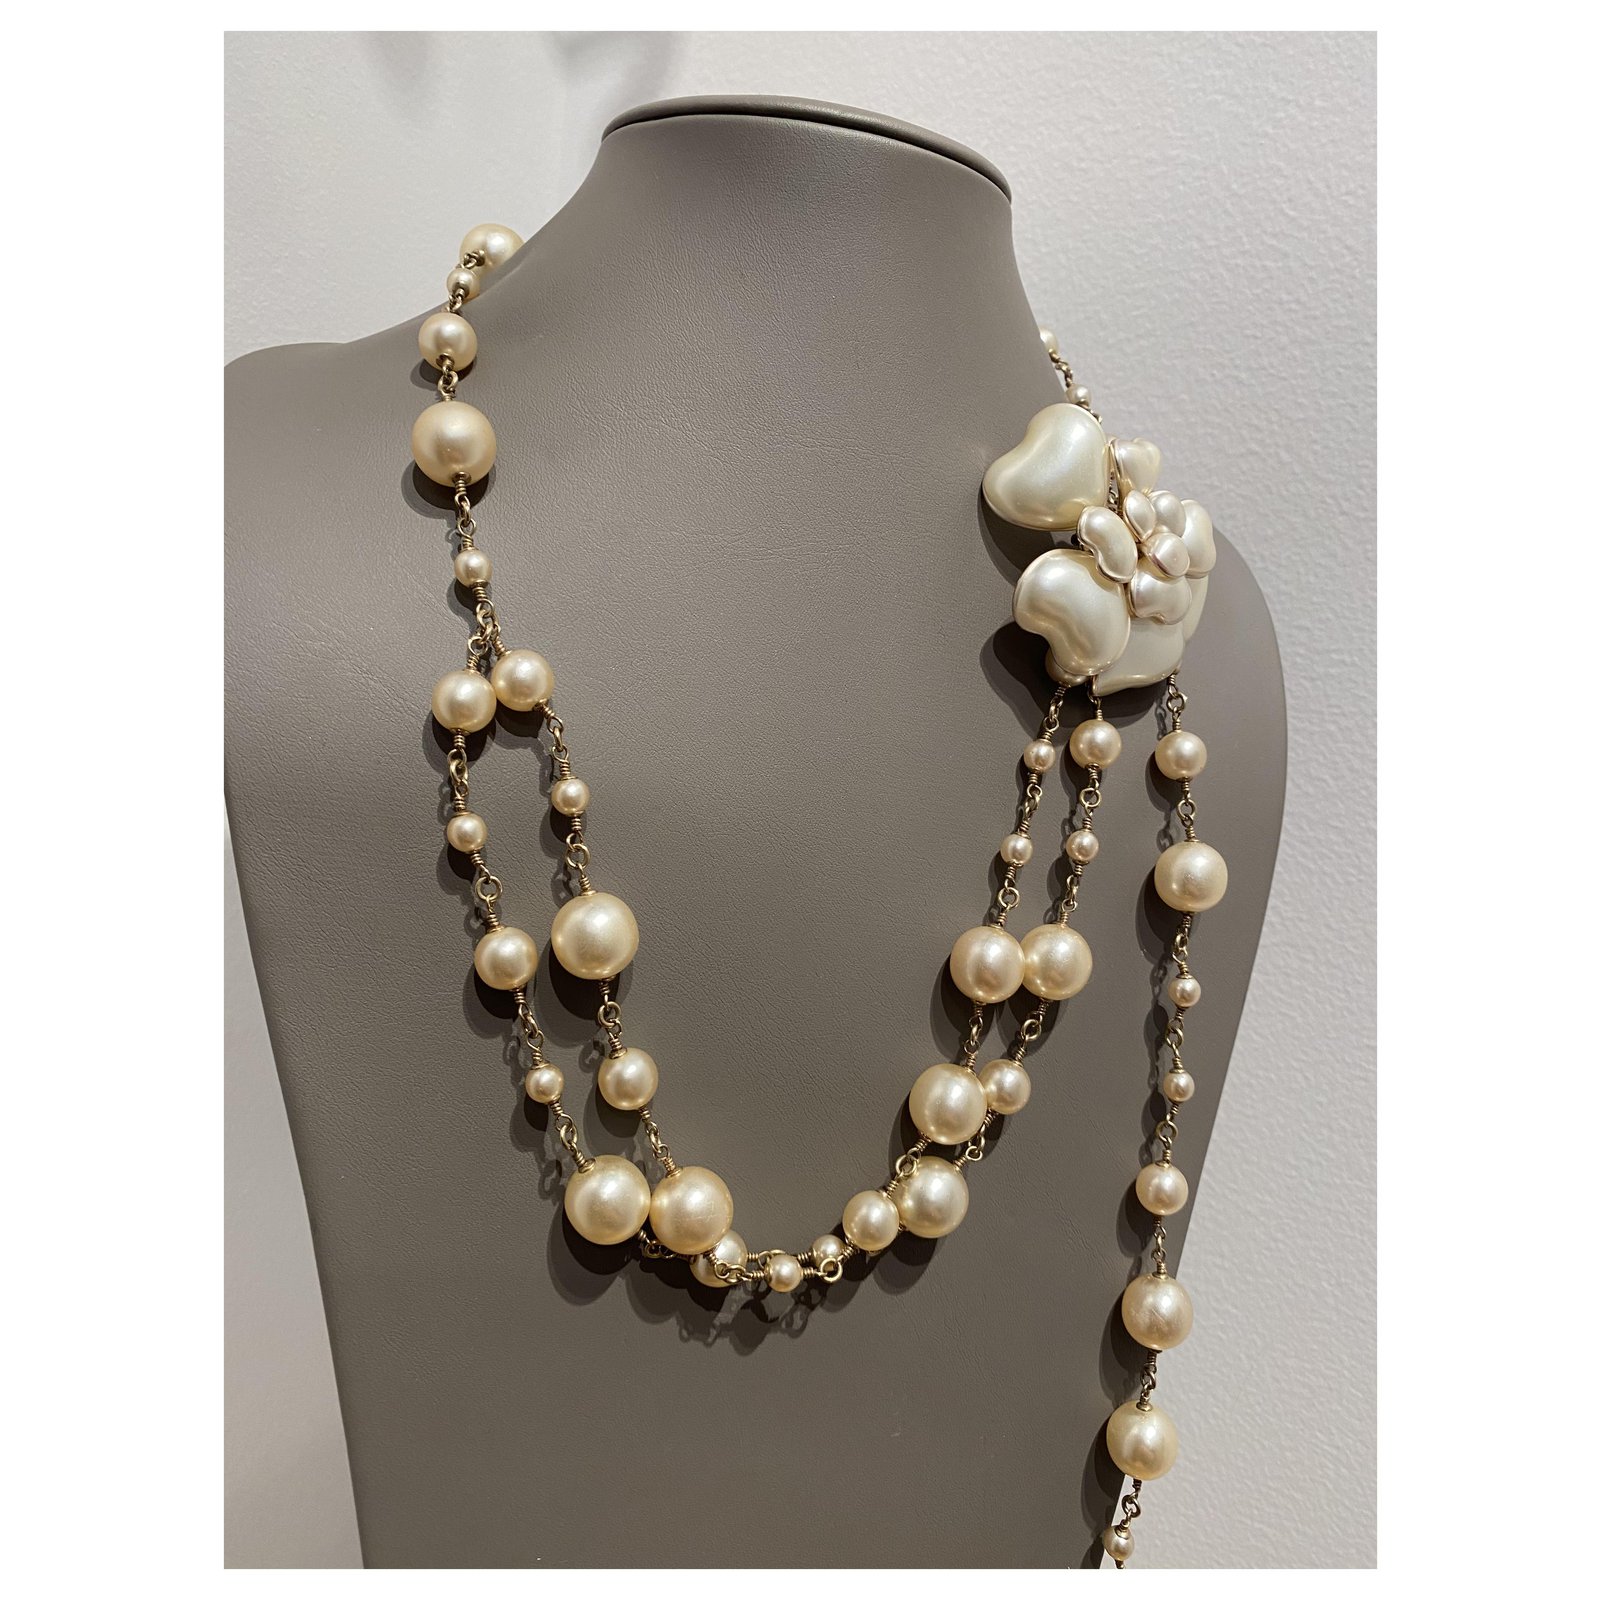 MINT CHANEL BEIGE PEARL NECKLACE